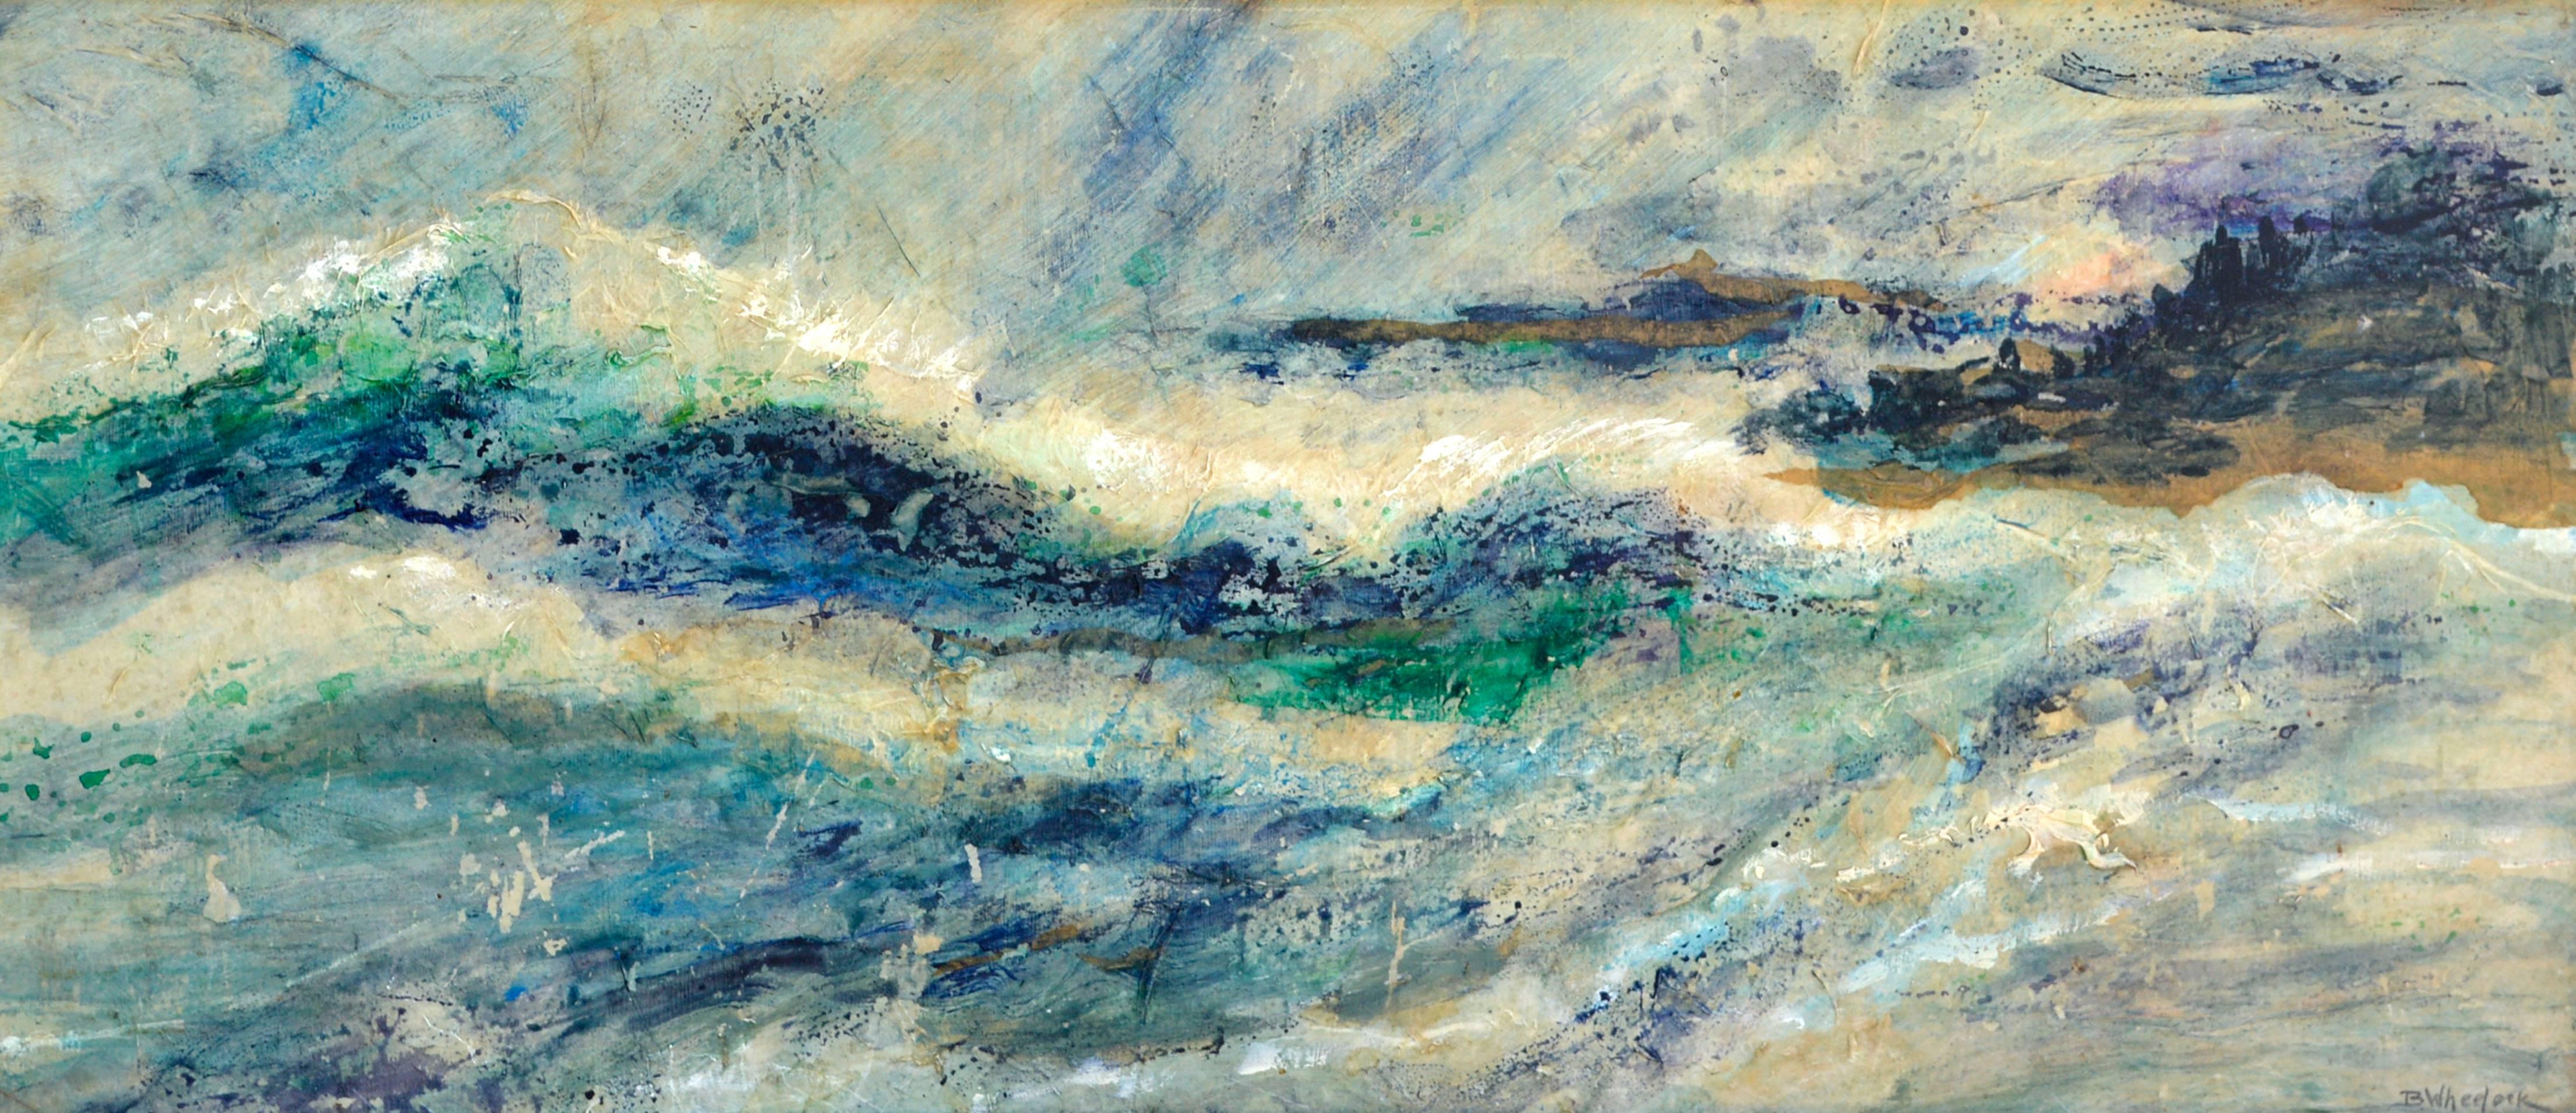 Abstract Waves - Painting by Beatrice Wheelock